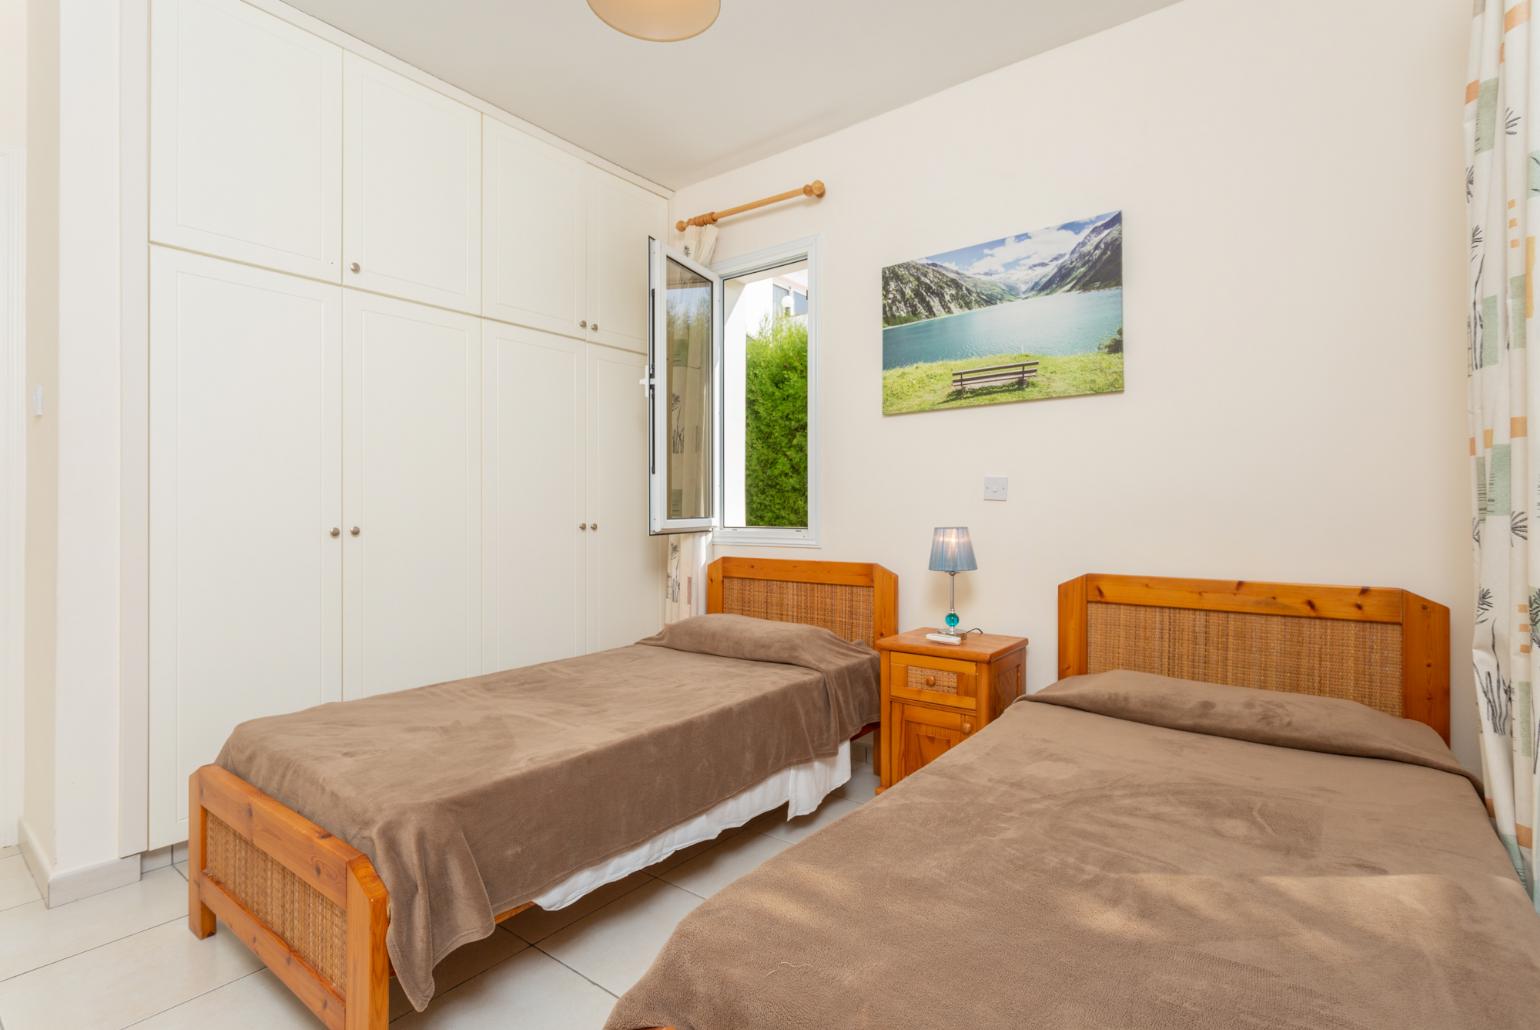 Twin bedroom with A/C and pool terrace access